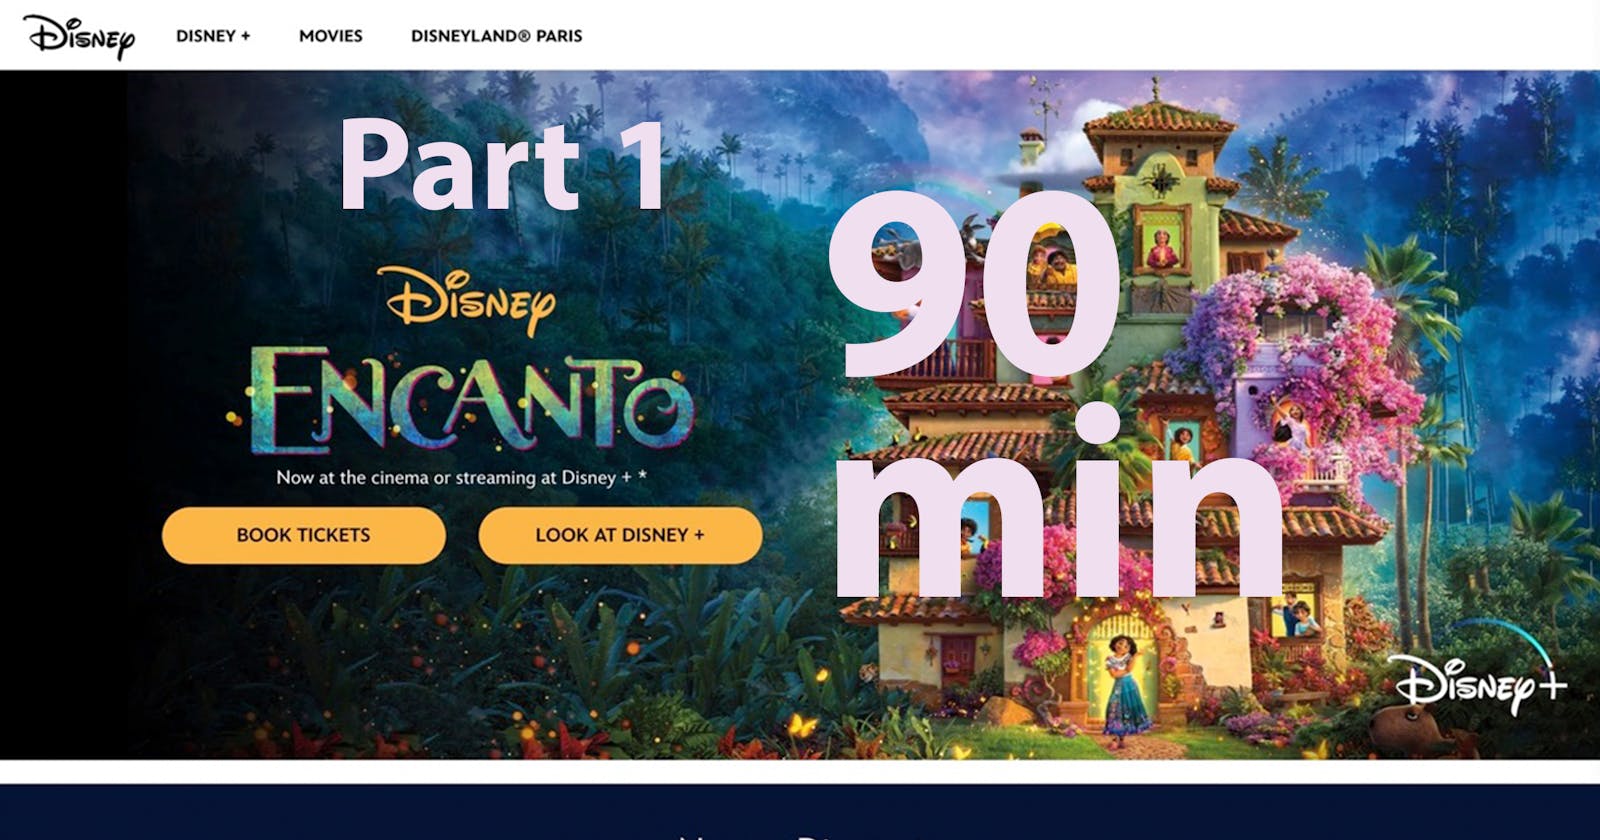 Make the Disney.com Landing Page in 90 minutes - YouTube Tutorial